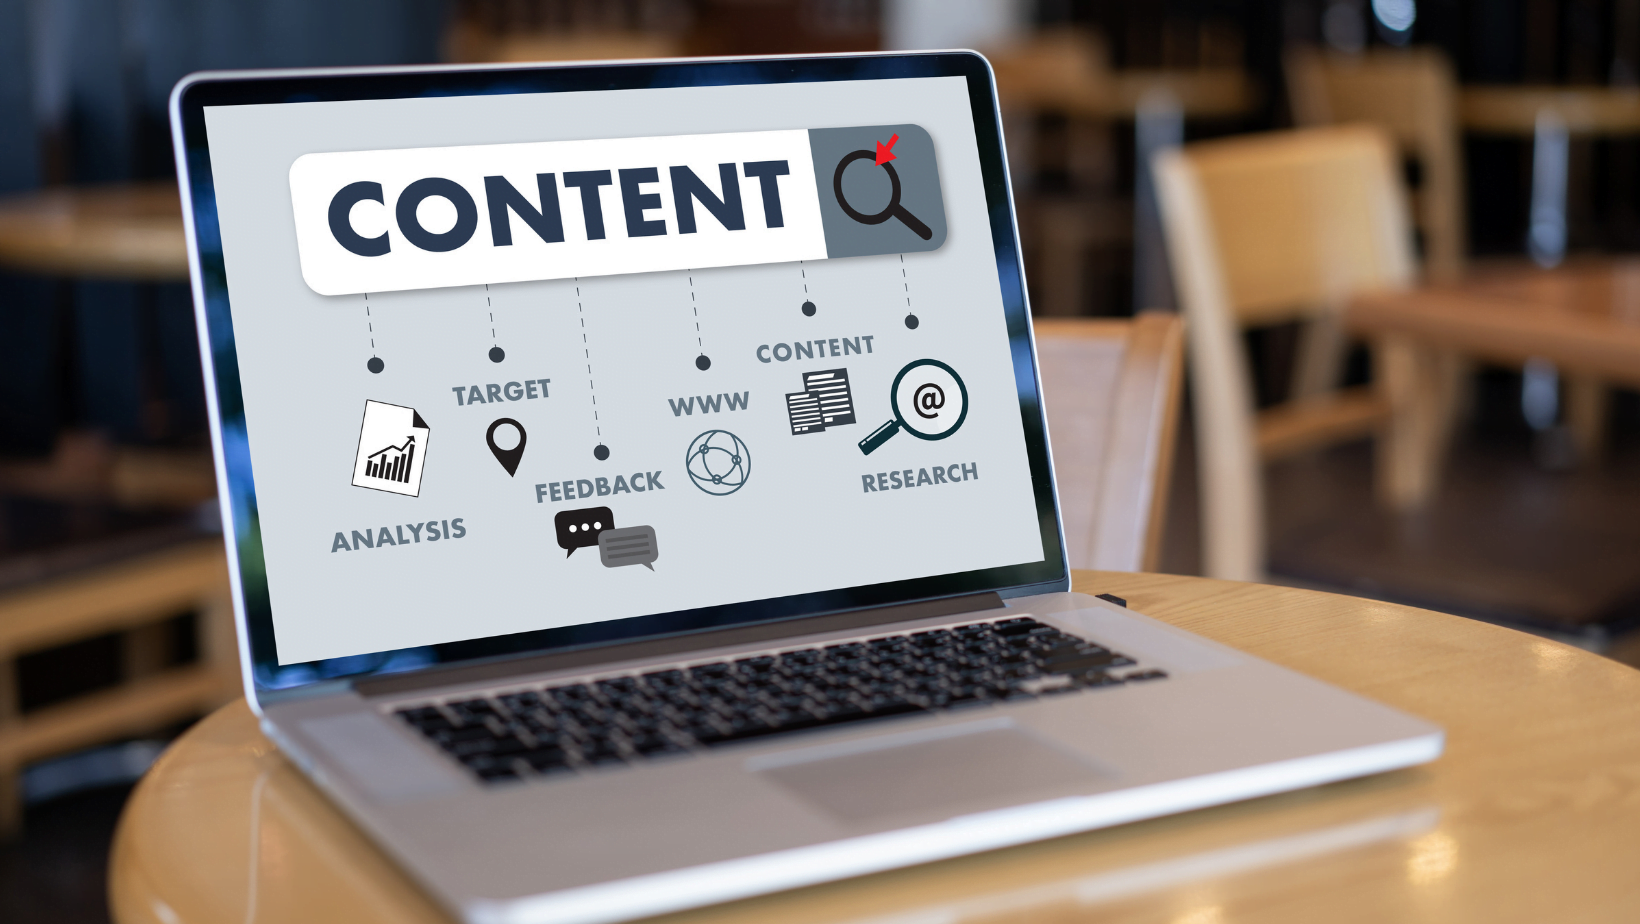 What Is the Gap Between SEO Content and Regular Content?